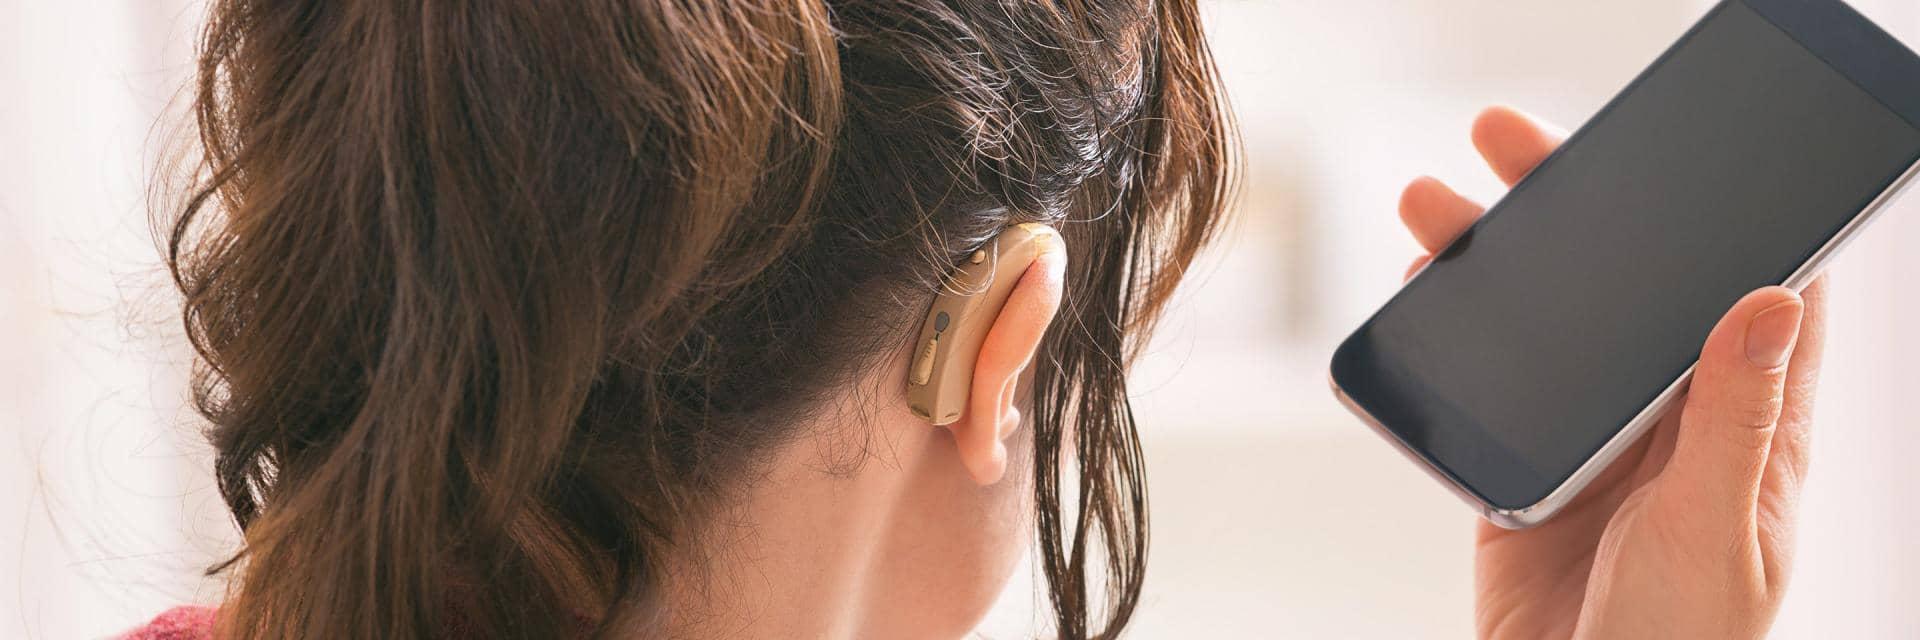  A woman wearing a hearing aid holds her phone near to her ear
